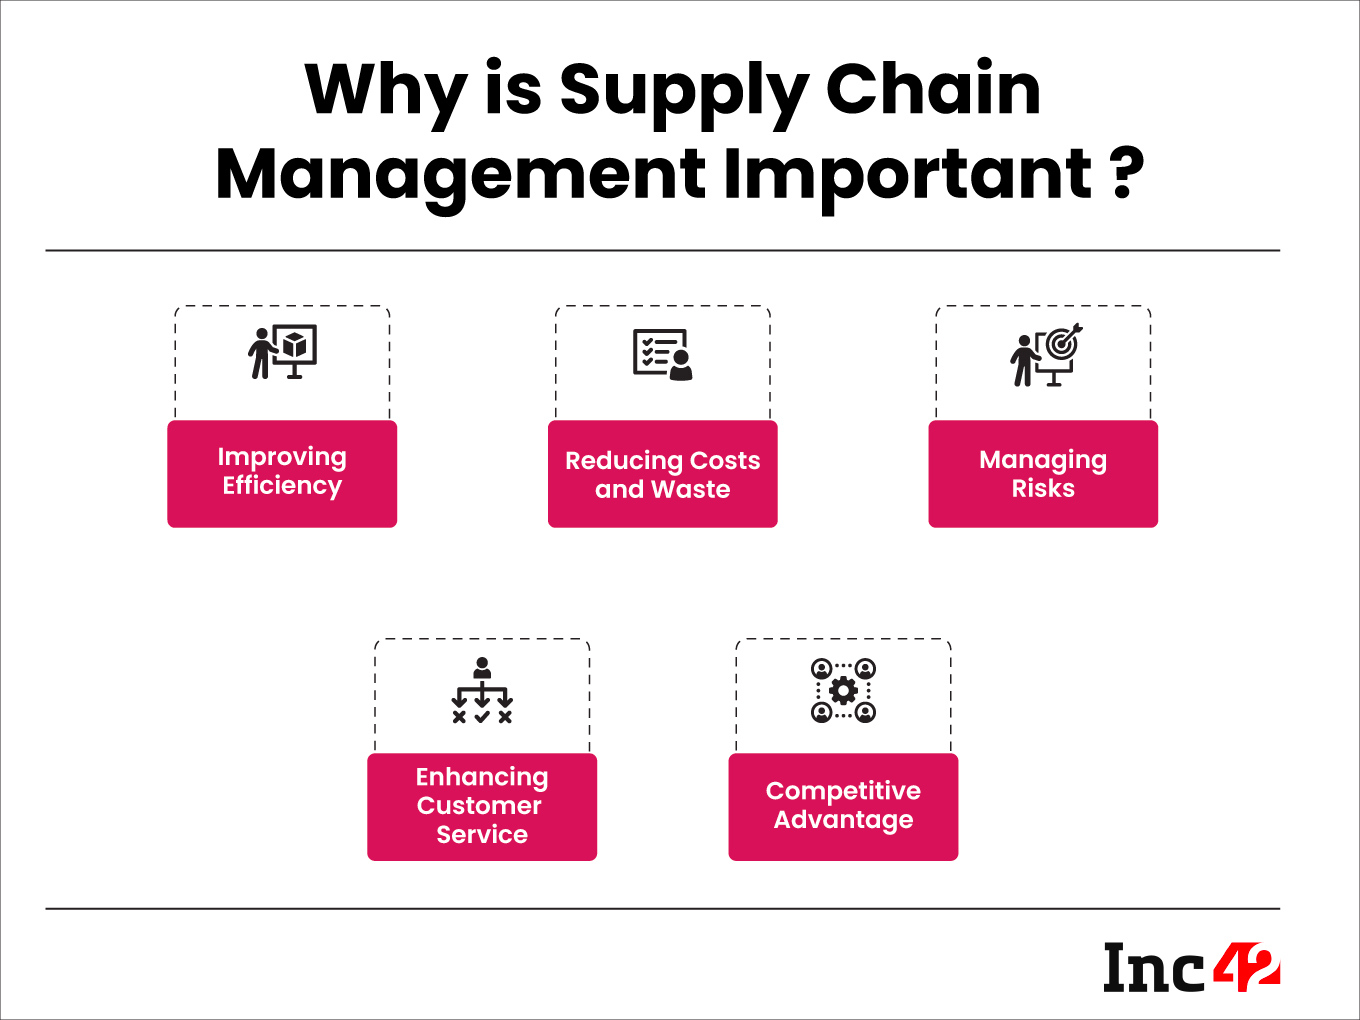 thesis topic about supply chain management